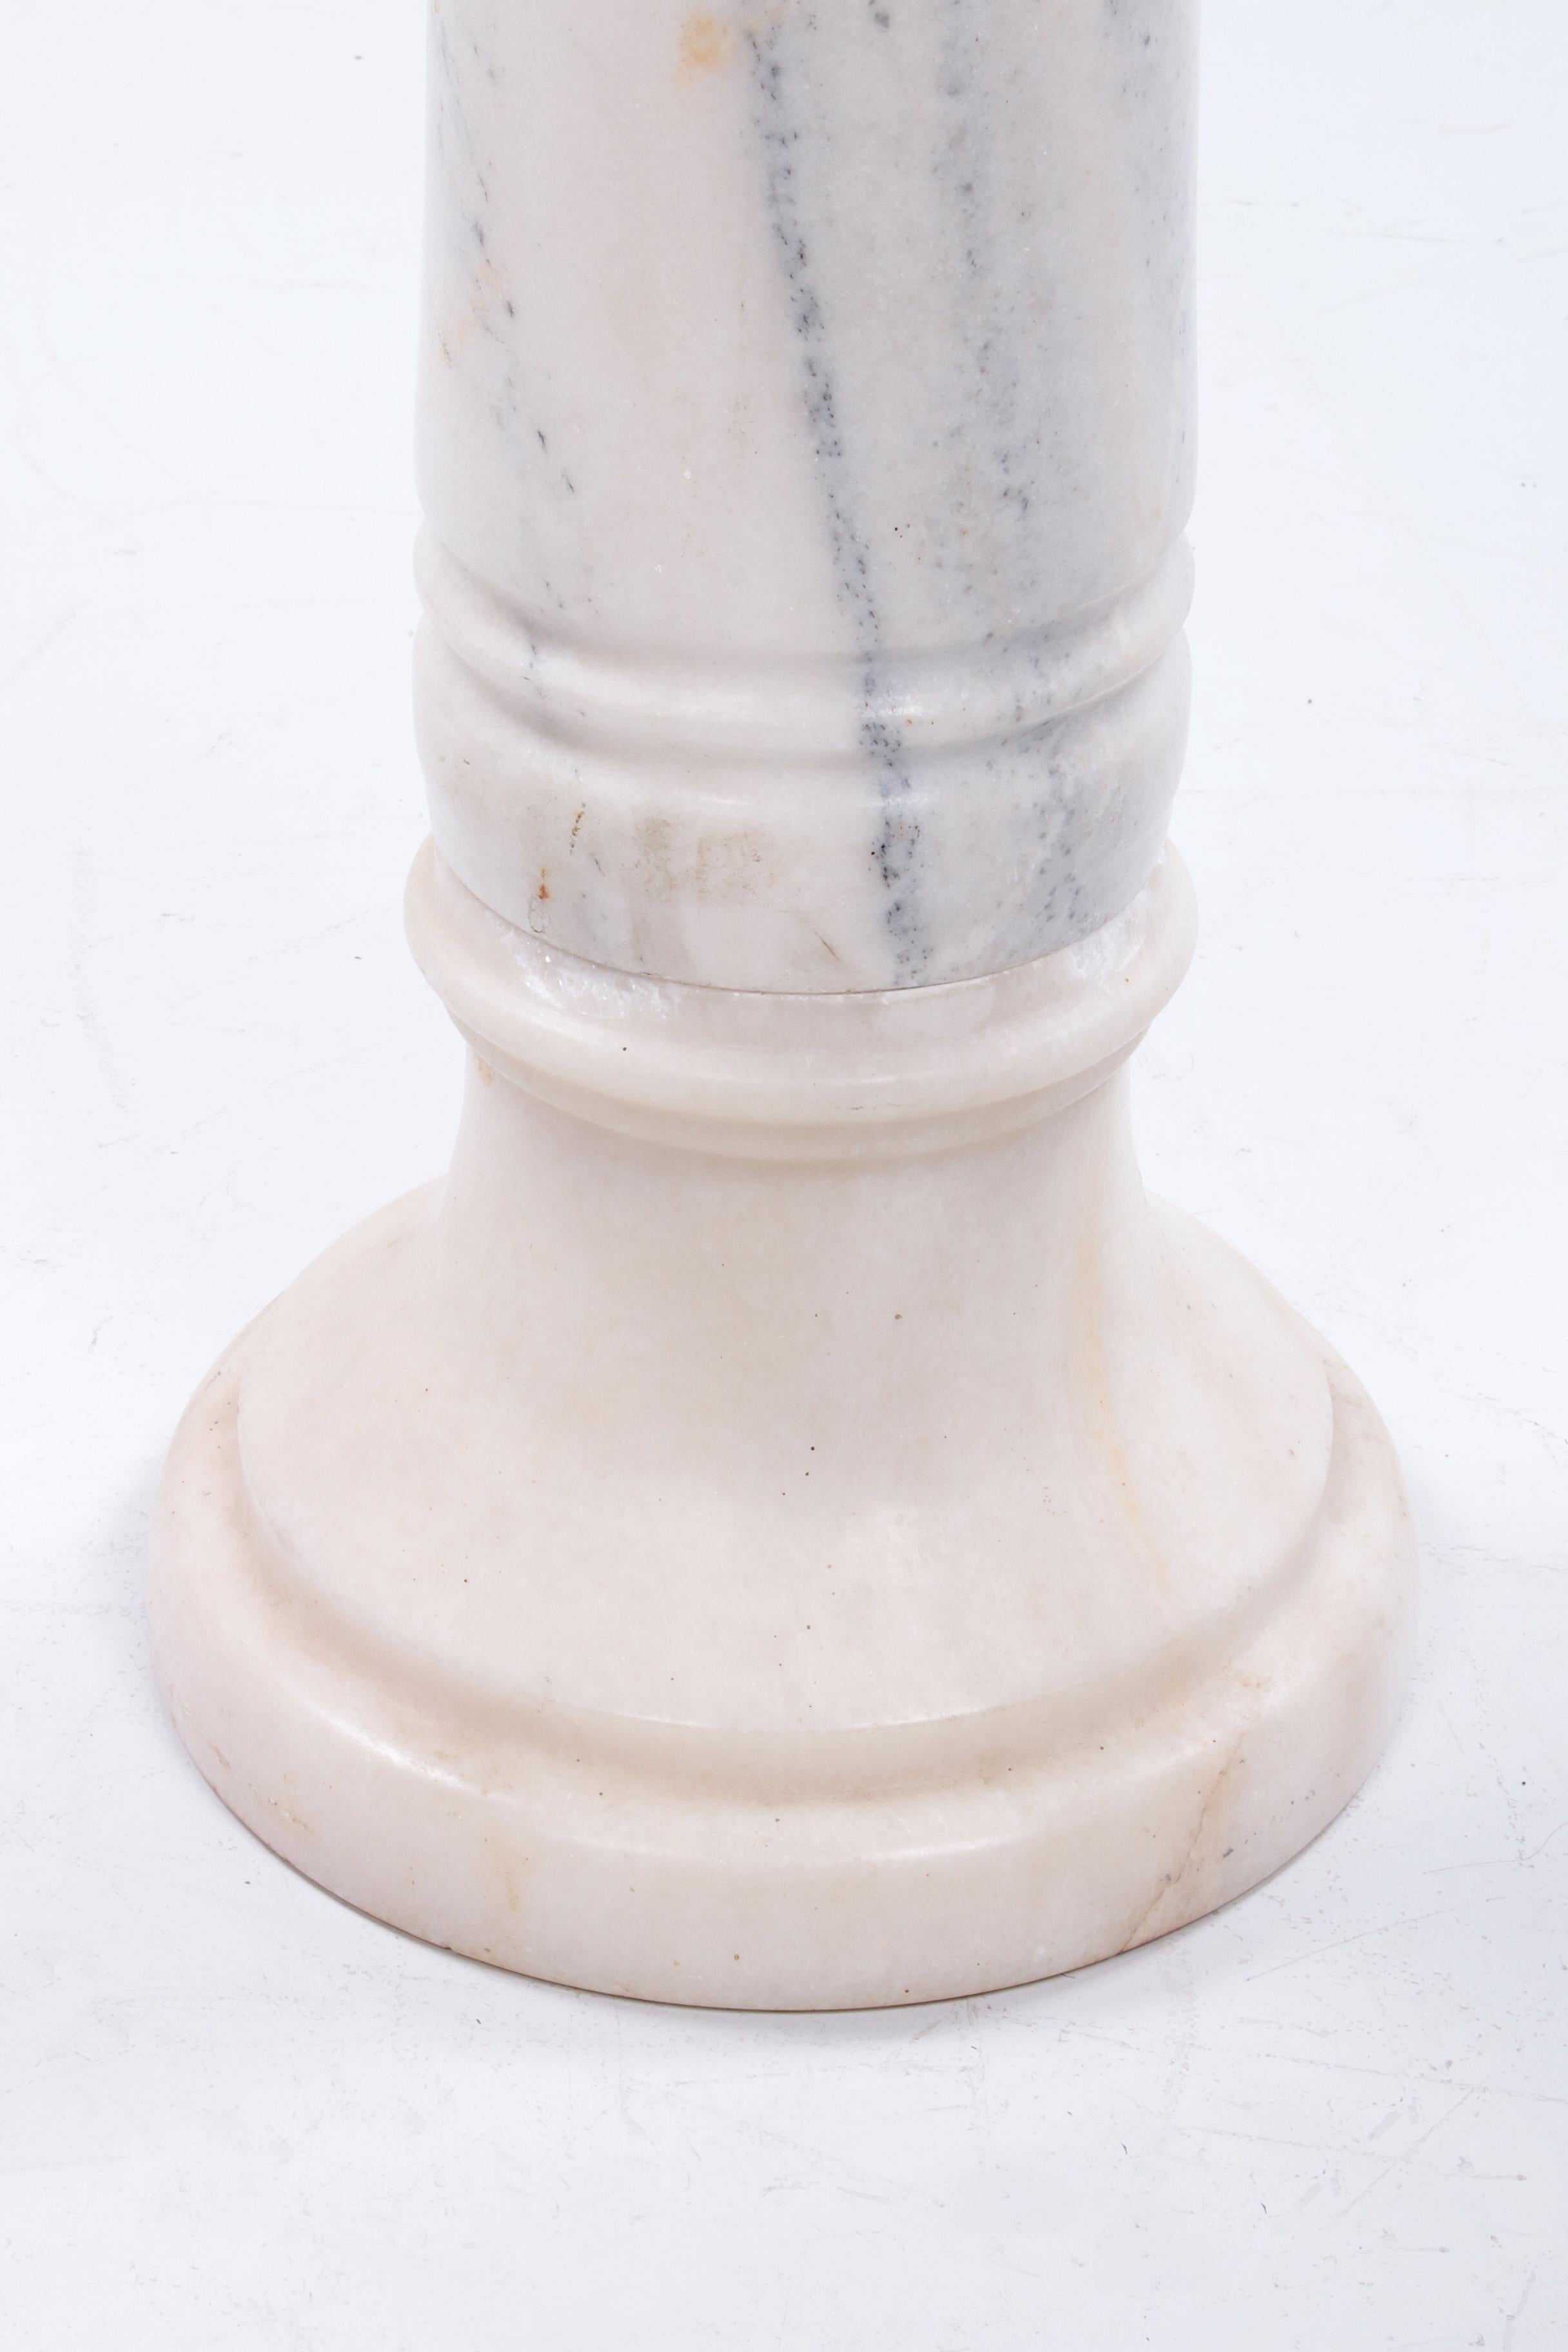 Mid-Century Modern Set of 2 Beautiful White Grey Veined Marble Pedestals, France, 1920 For Sale